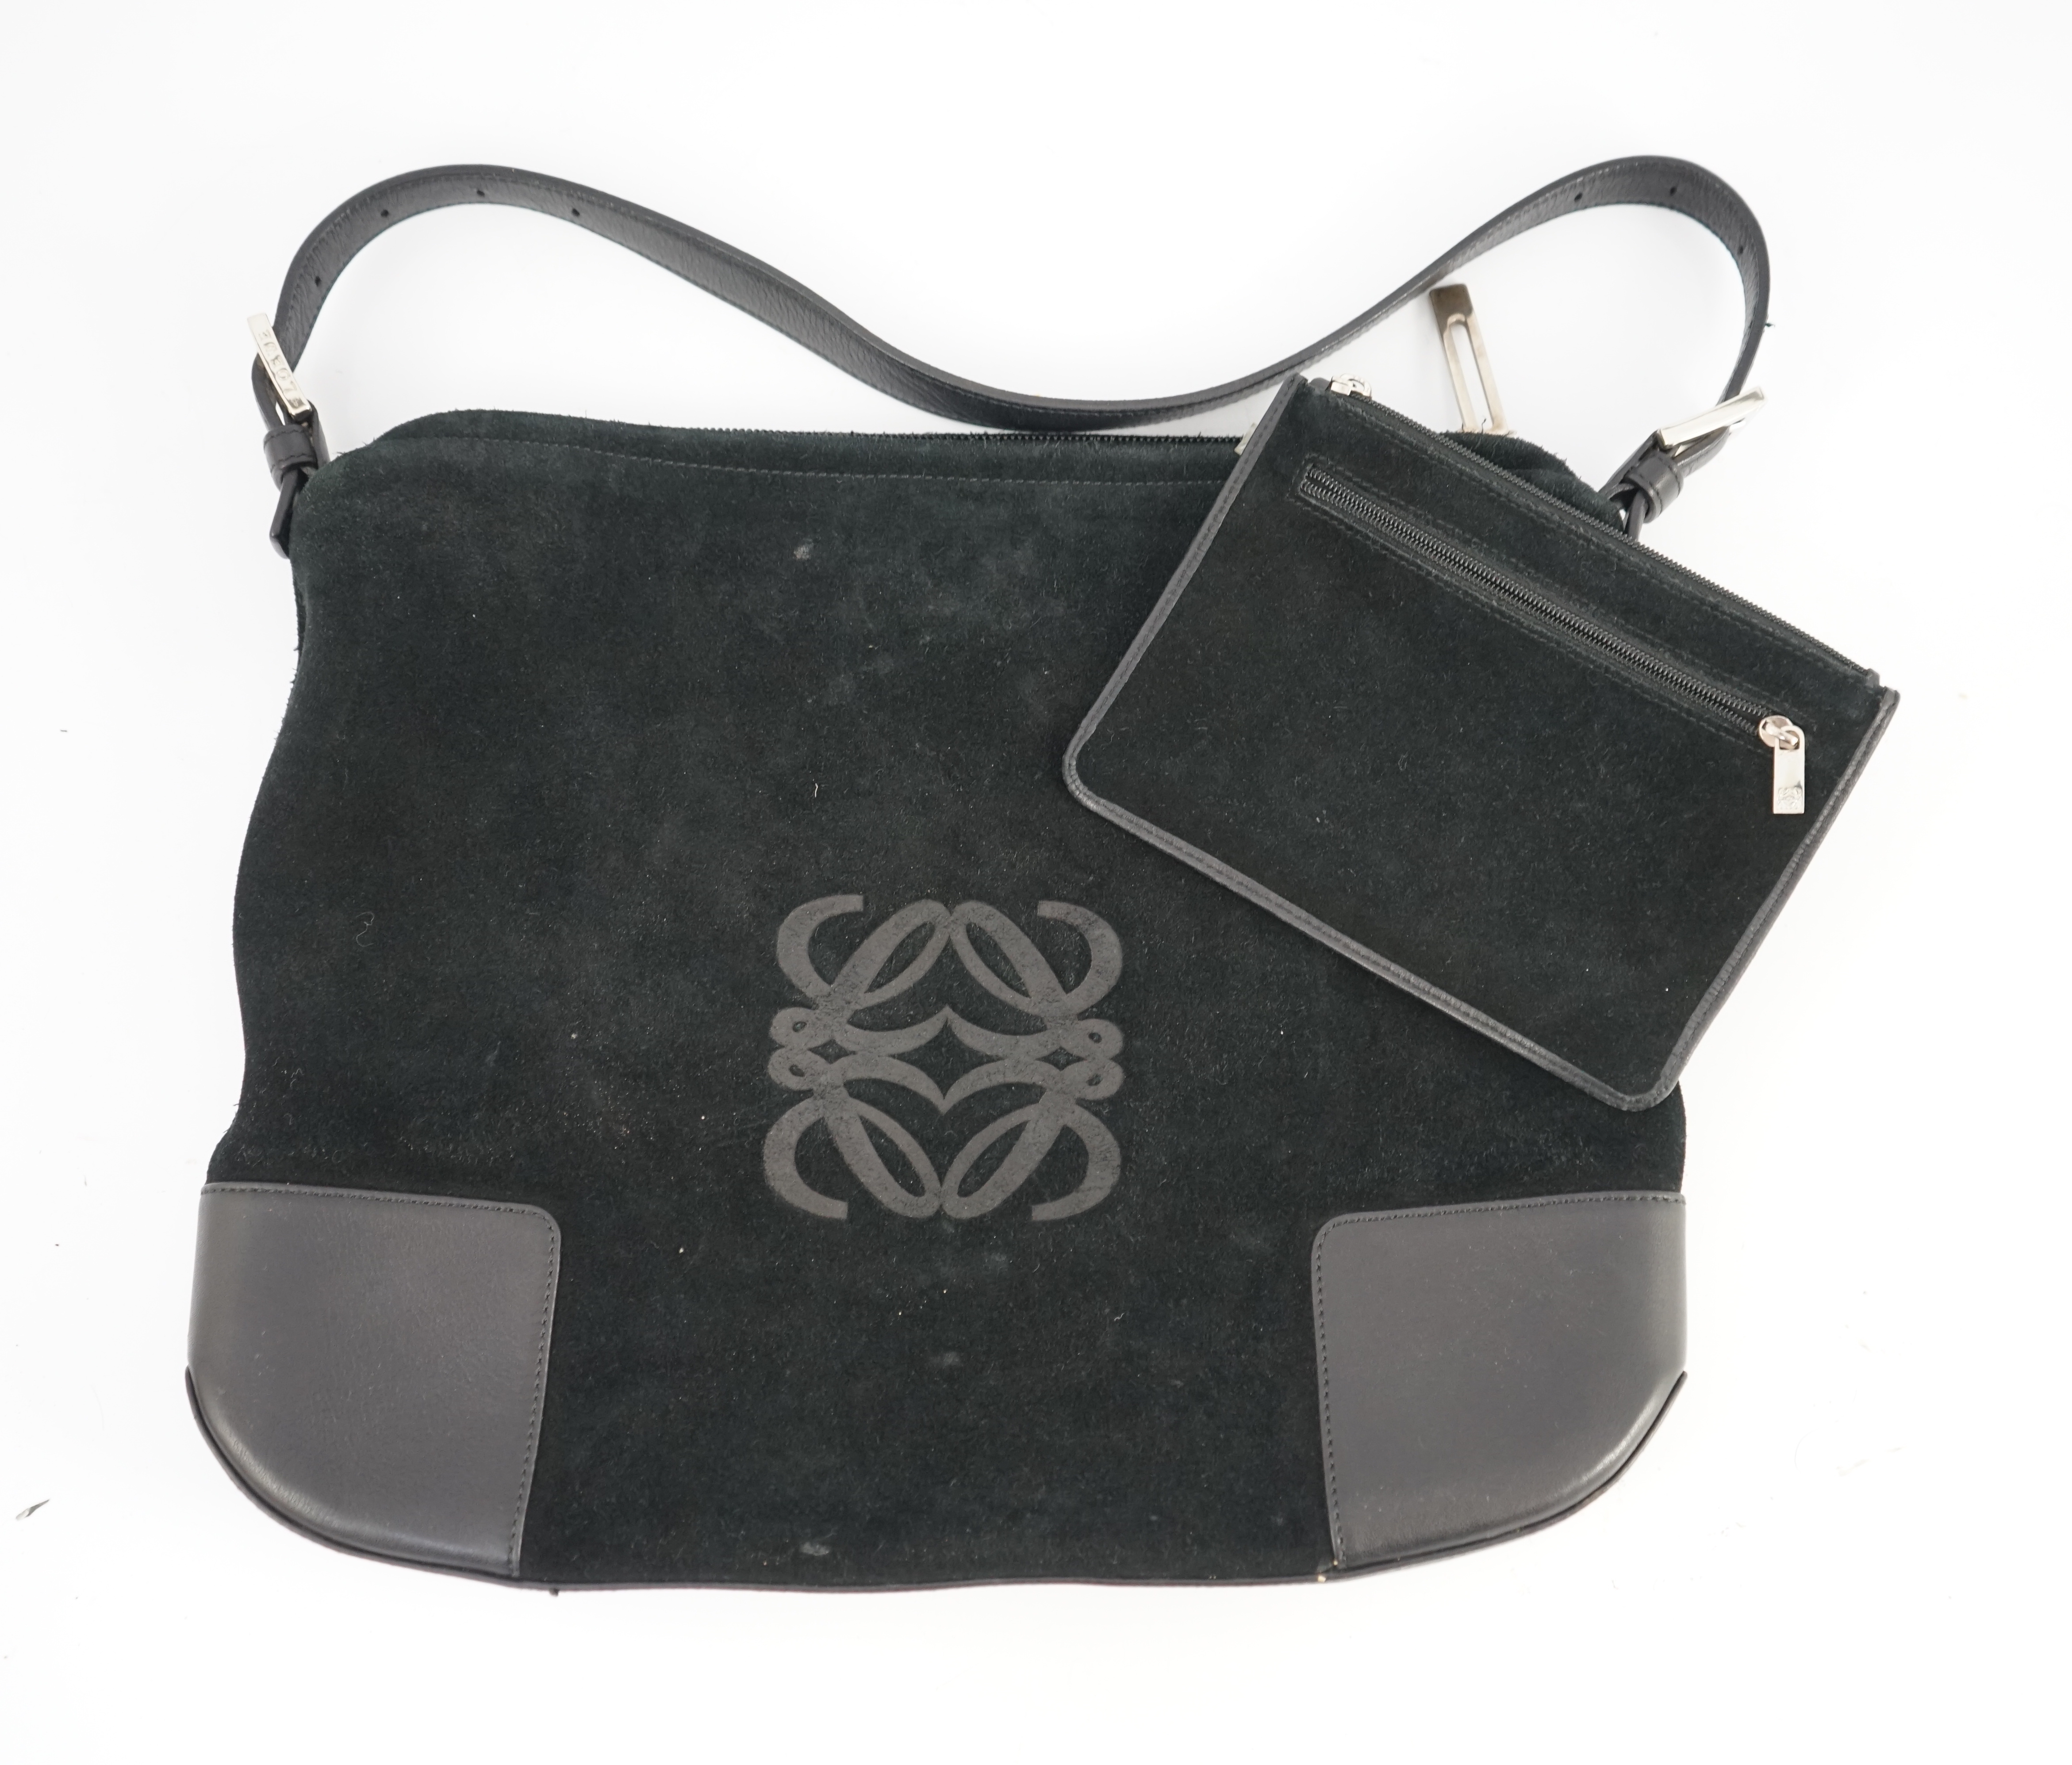 A Loewe black suede and leather shoulder bag and purse, bag width 34cm, depth 3cm, height 28cm, purse width 16.5cm, height 12cm